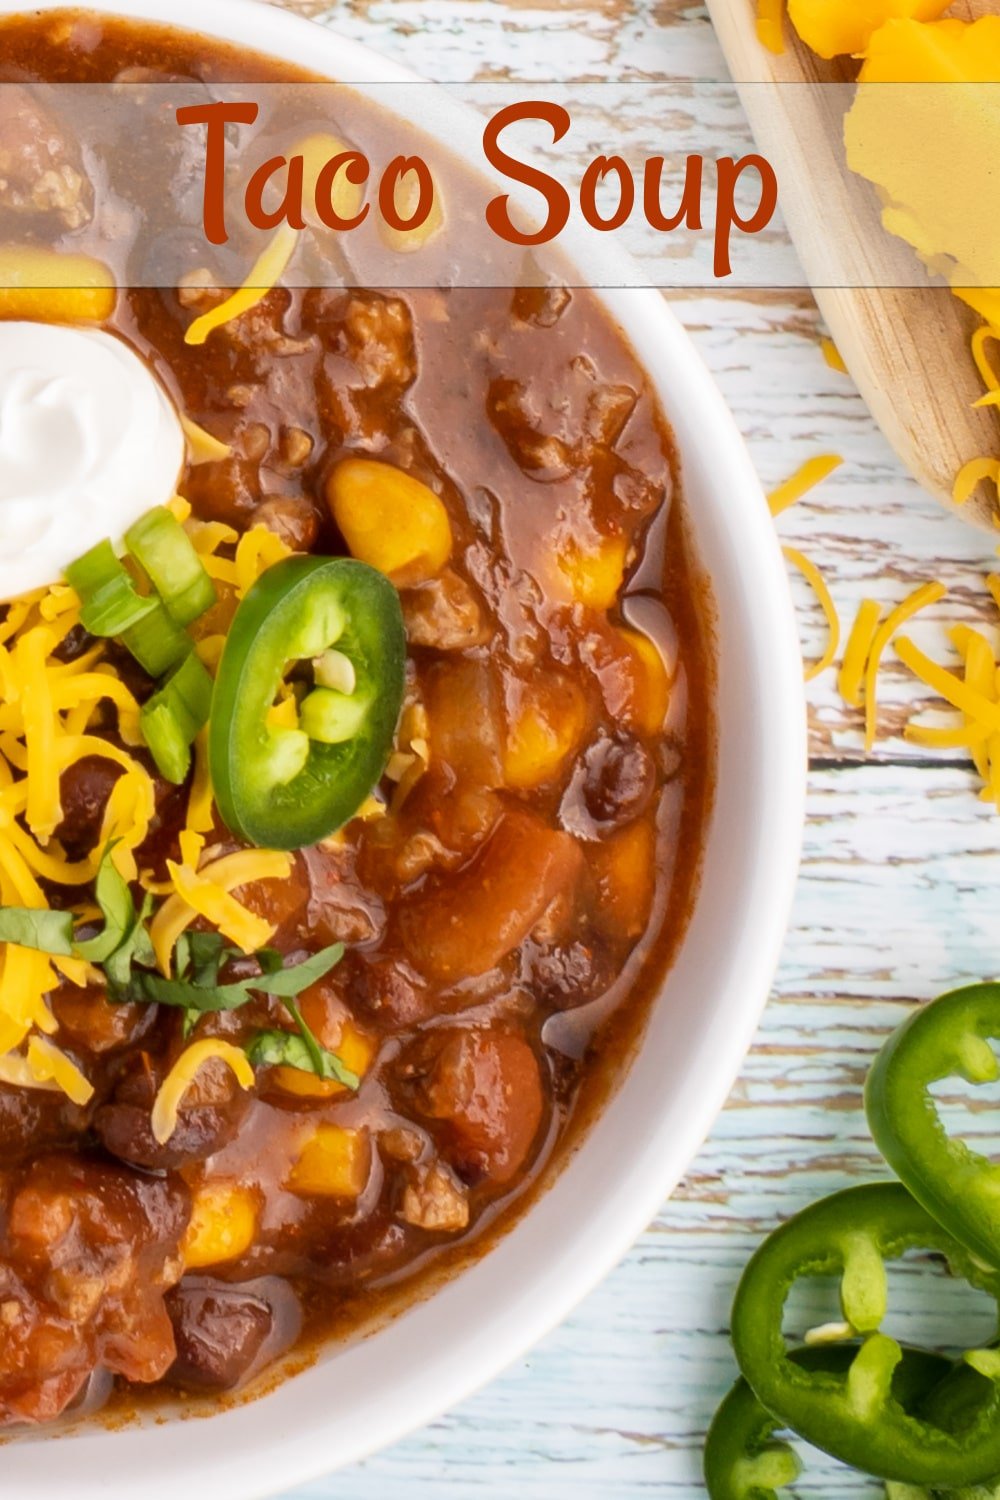 Taco inspired soup that gives even the tastiest chili a run for its money. This is thick and satisfying soup has a tomato-salsa base and the ground beef is seasoned with taco spices. Added texture comes from corn and black beans. It's both pantry and budget friendly. Imagine classic American ground beef tacos transformed into a heartwarming soup. via @cmpollak1